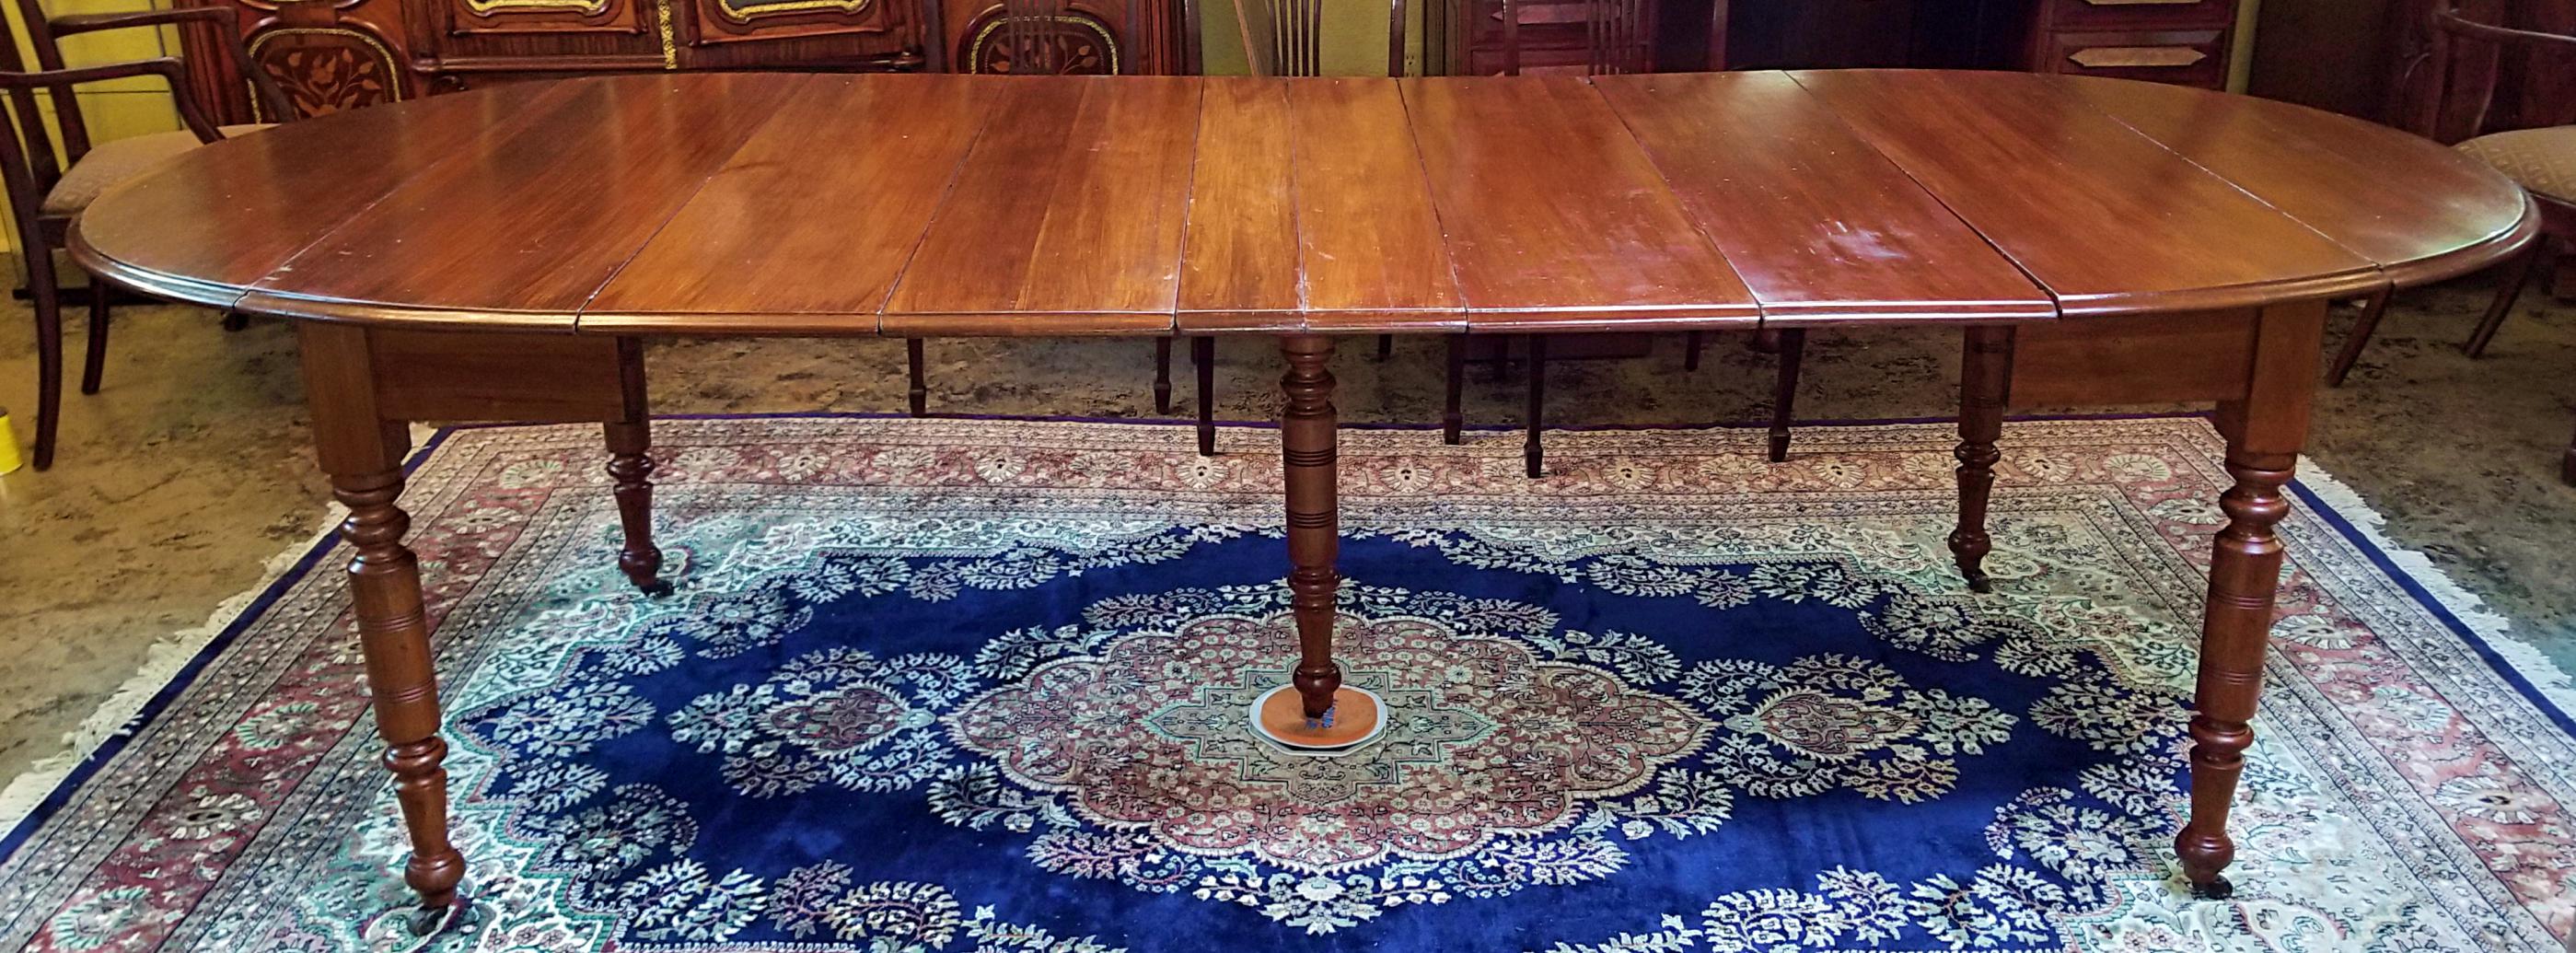 cherry dining table